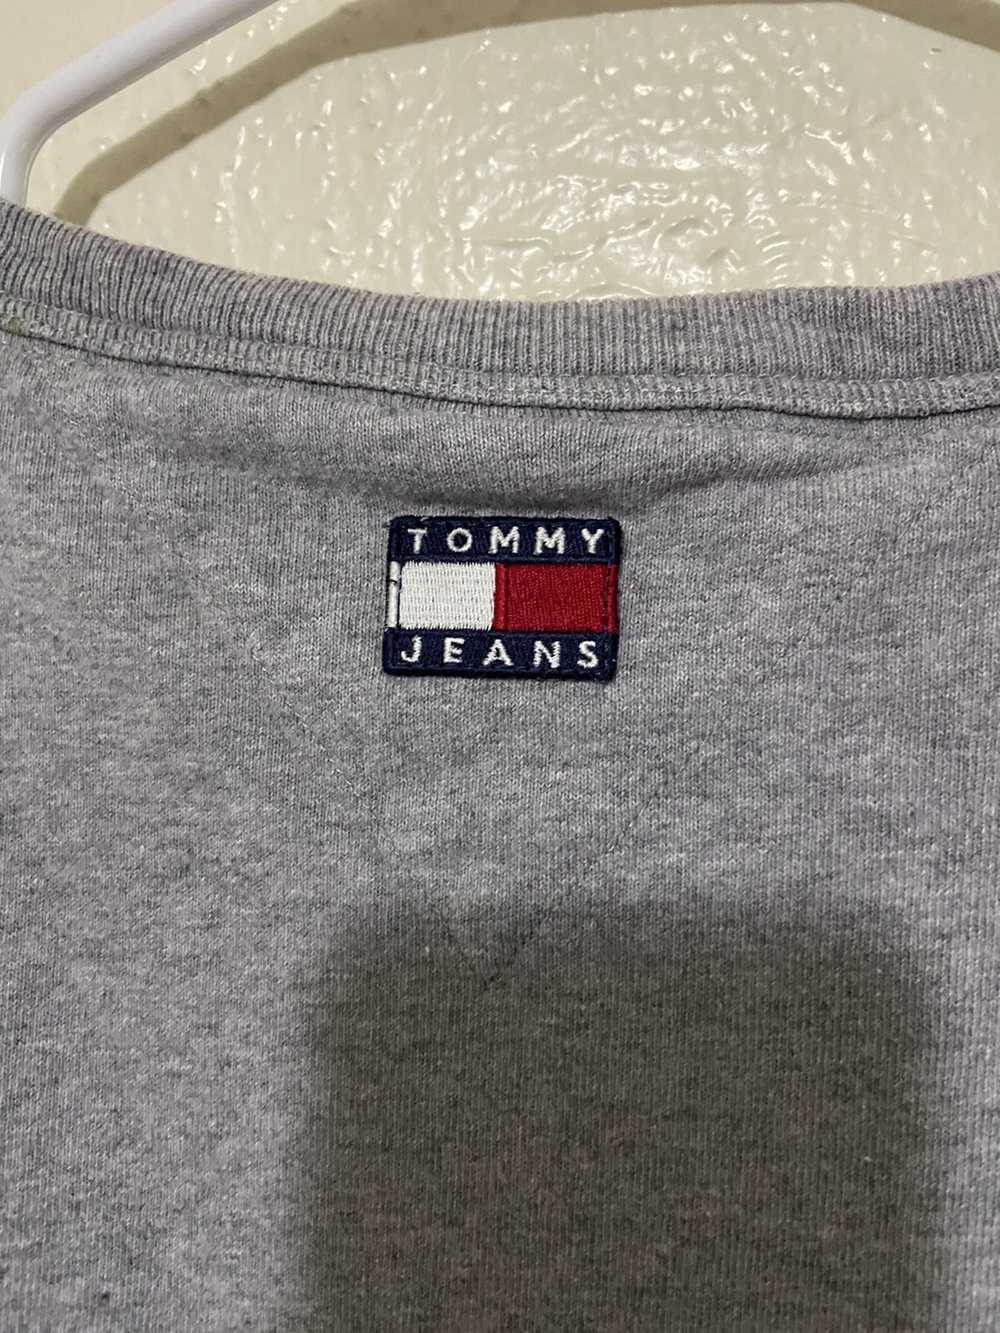 Tommy Jeans Tommy Jeans Tee - image 4